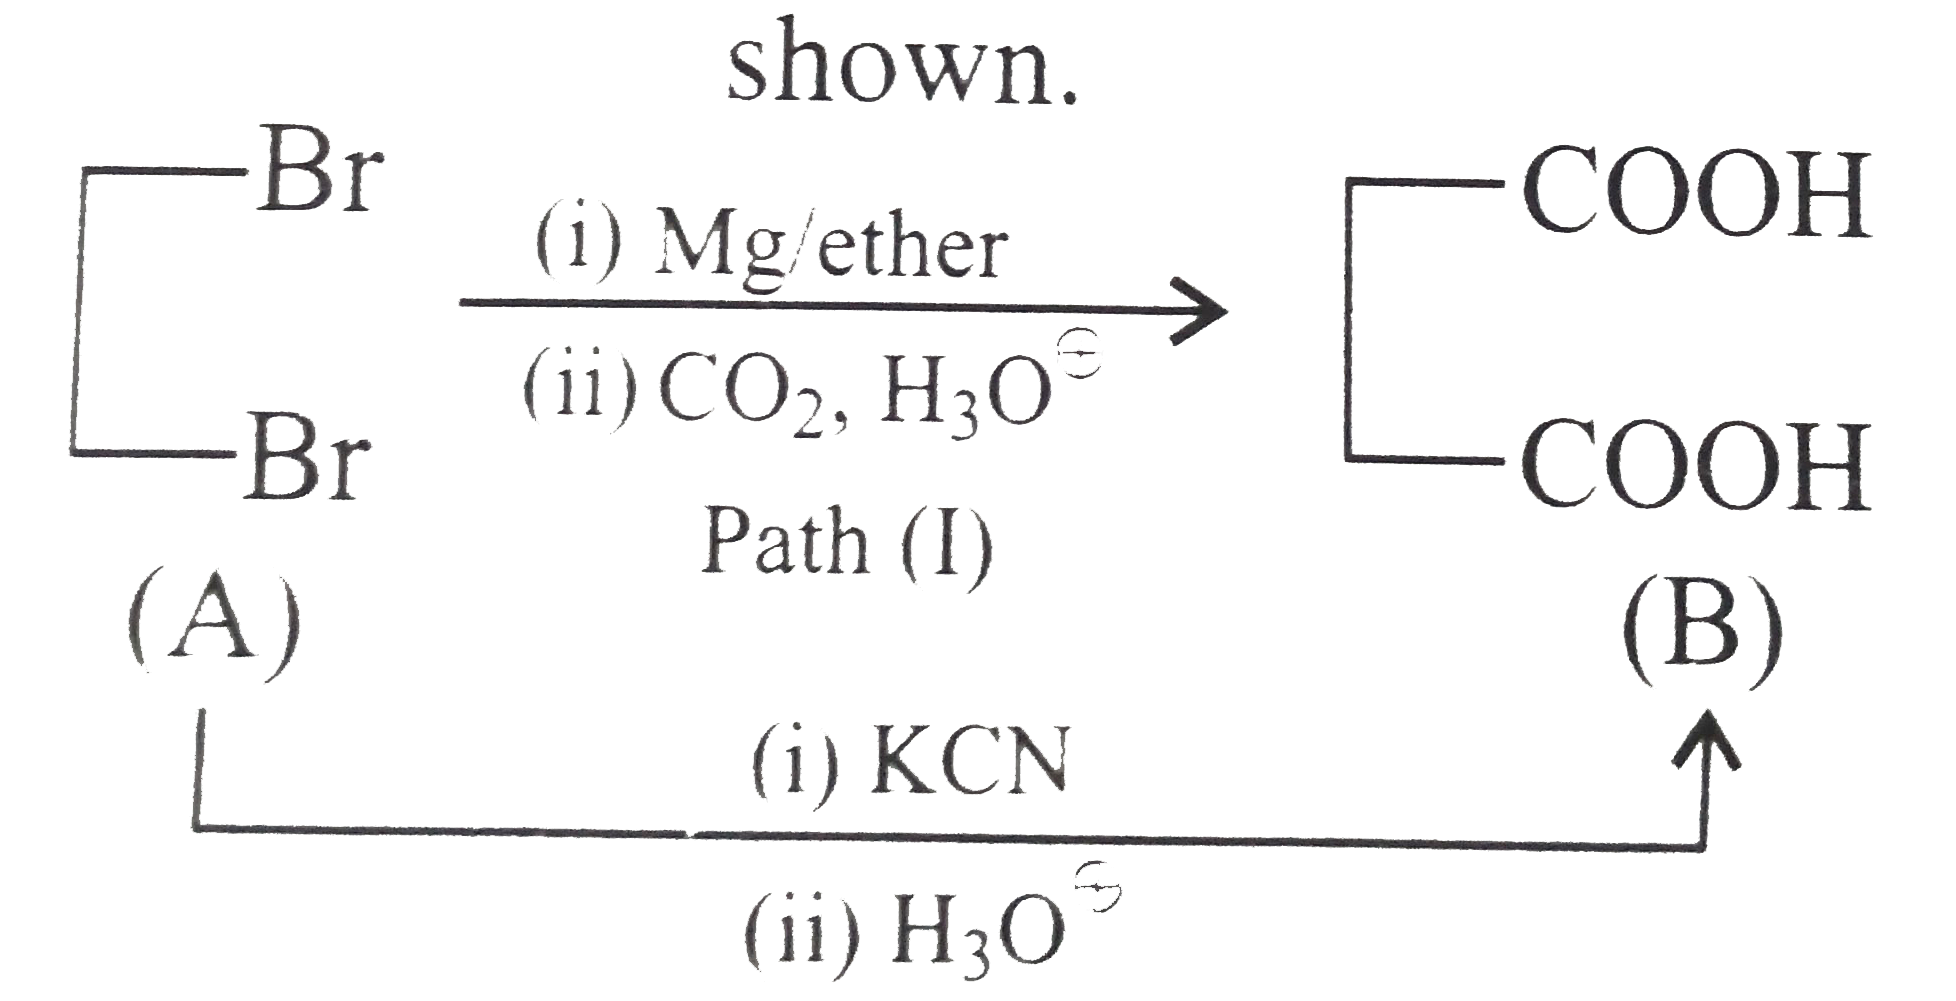 Succinic acid (B) can be prepared by both nitrile and carbonation method as shown.      Both paths give good yields of (B).   (A) with Mg would lead to the loss of vicinal Br atoms to give alkene and MgBr2.